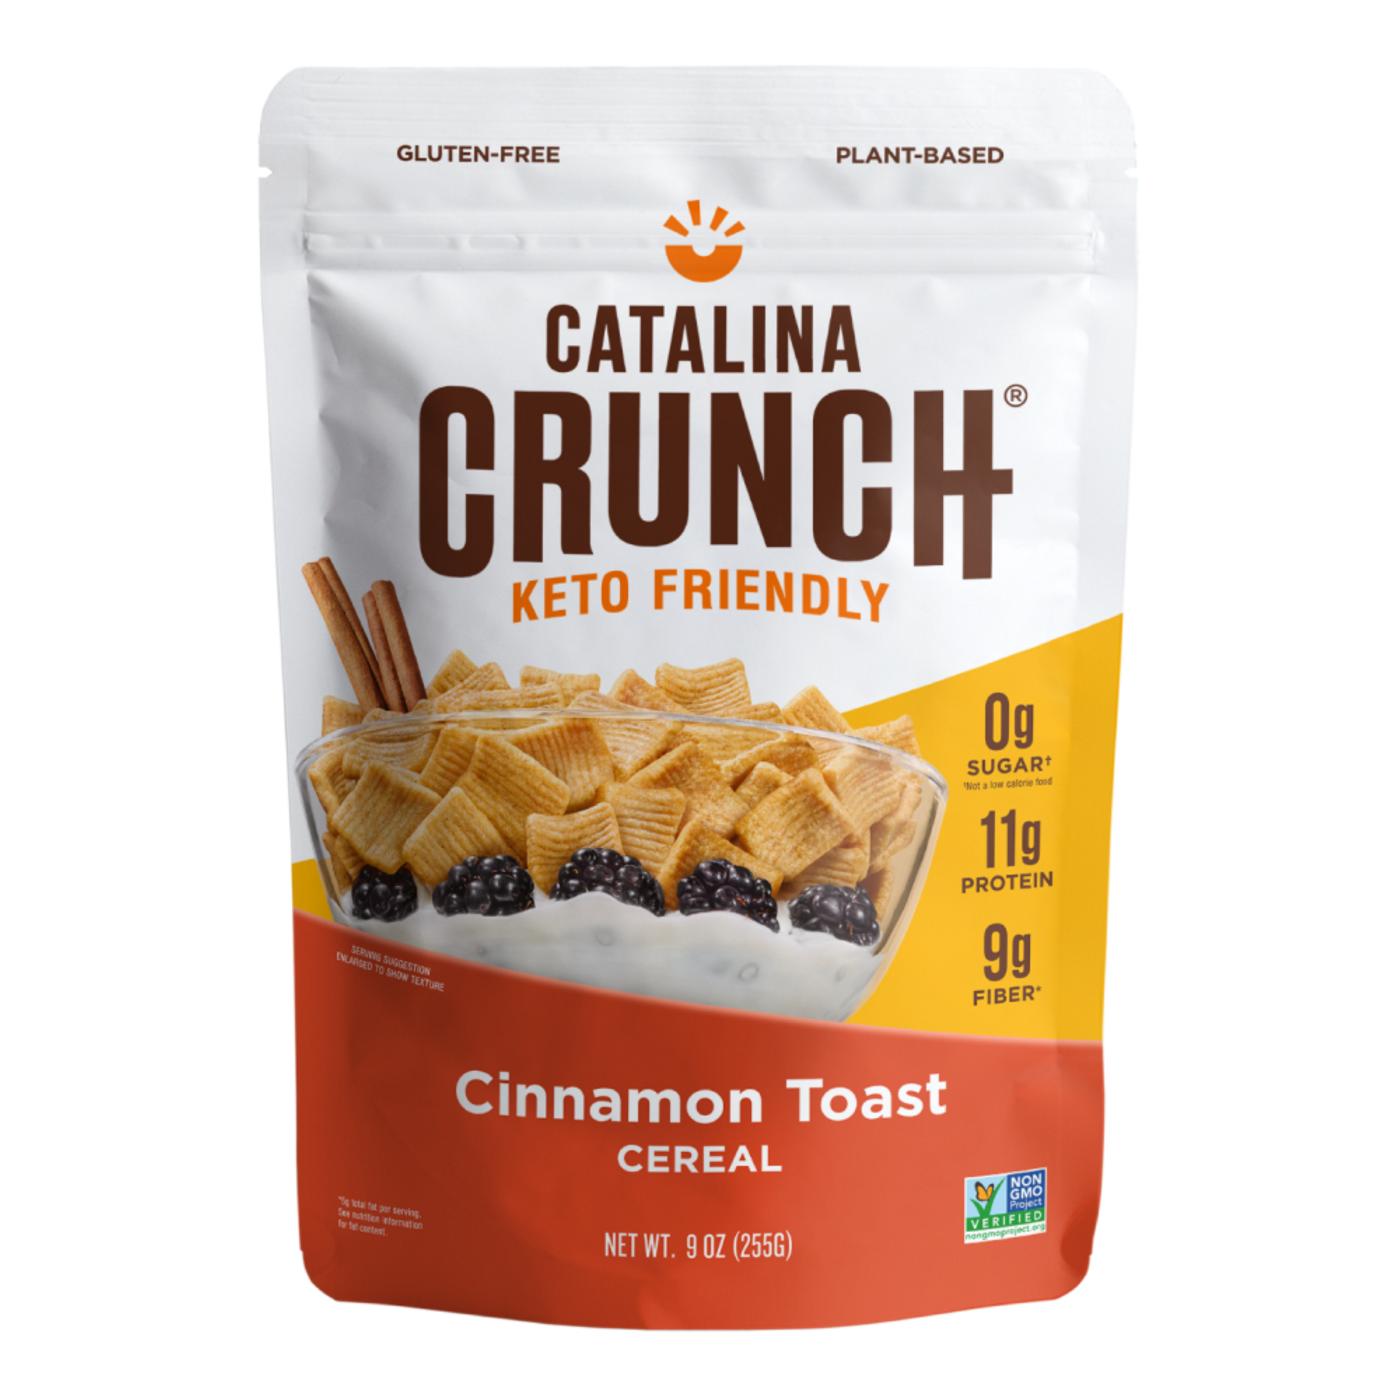 Catalina Crunch Keto Friendly Cinnamon Toast Cereal; image 1 of 3